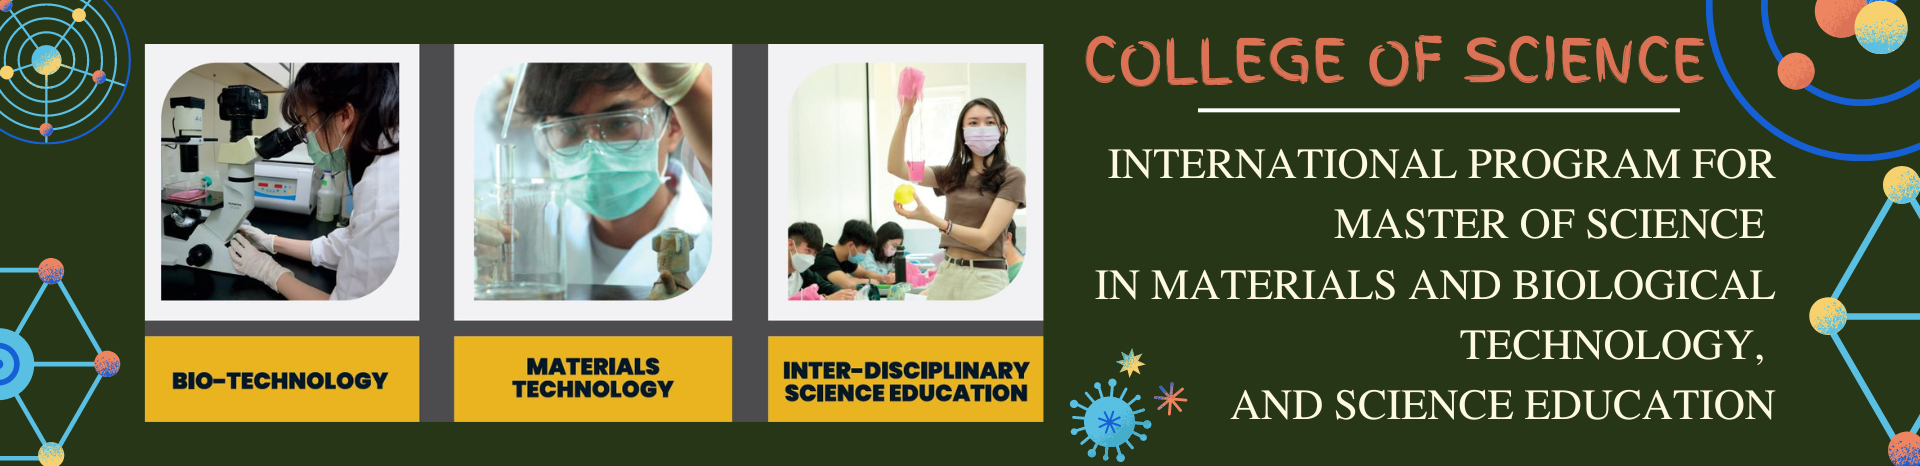 International Program for master of science in materials and biological technology and science education